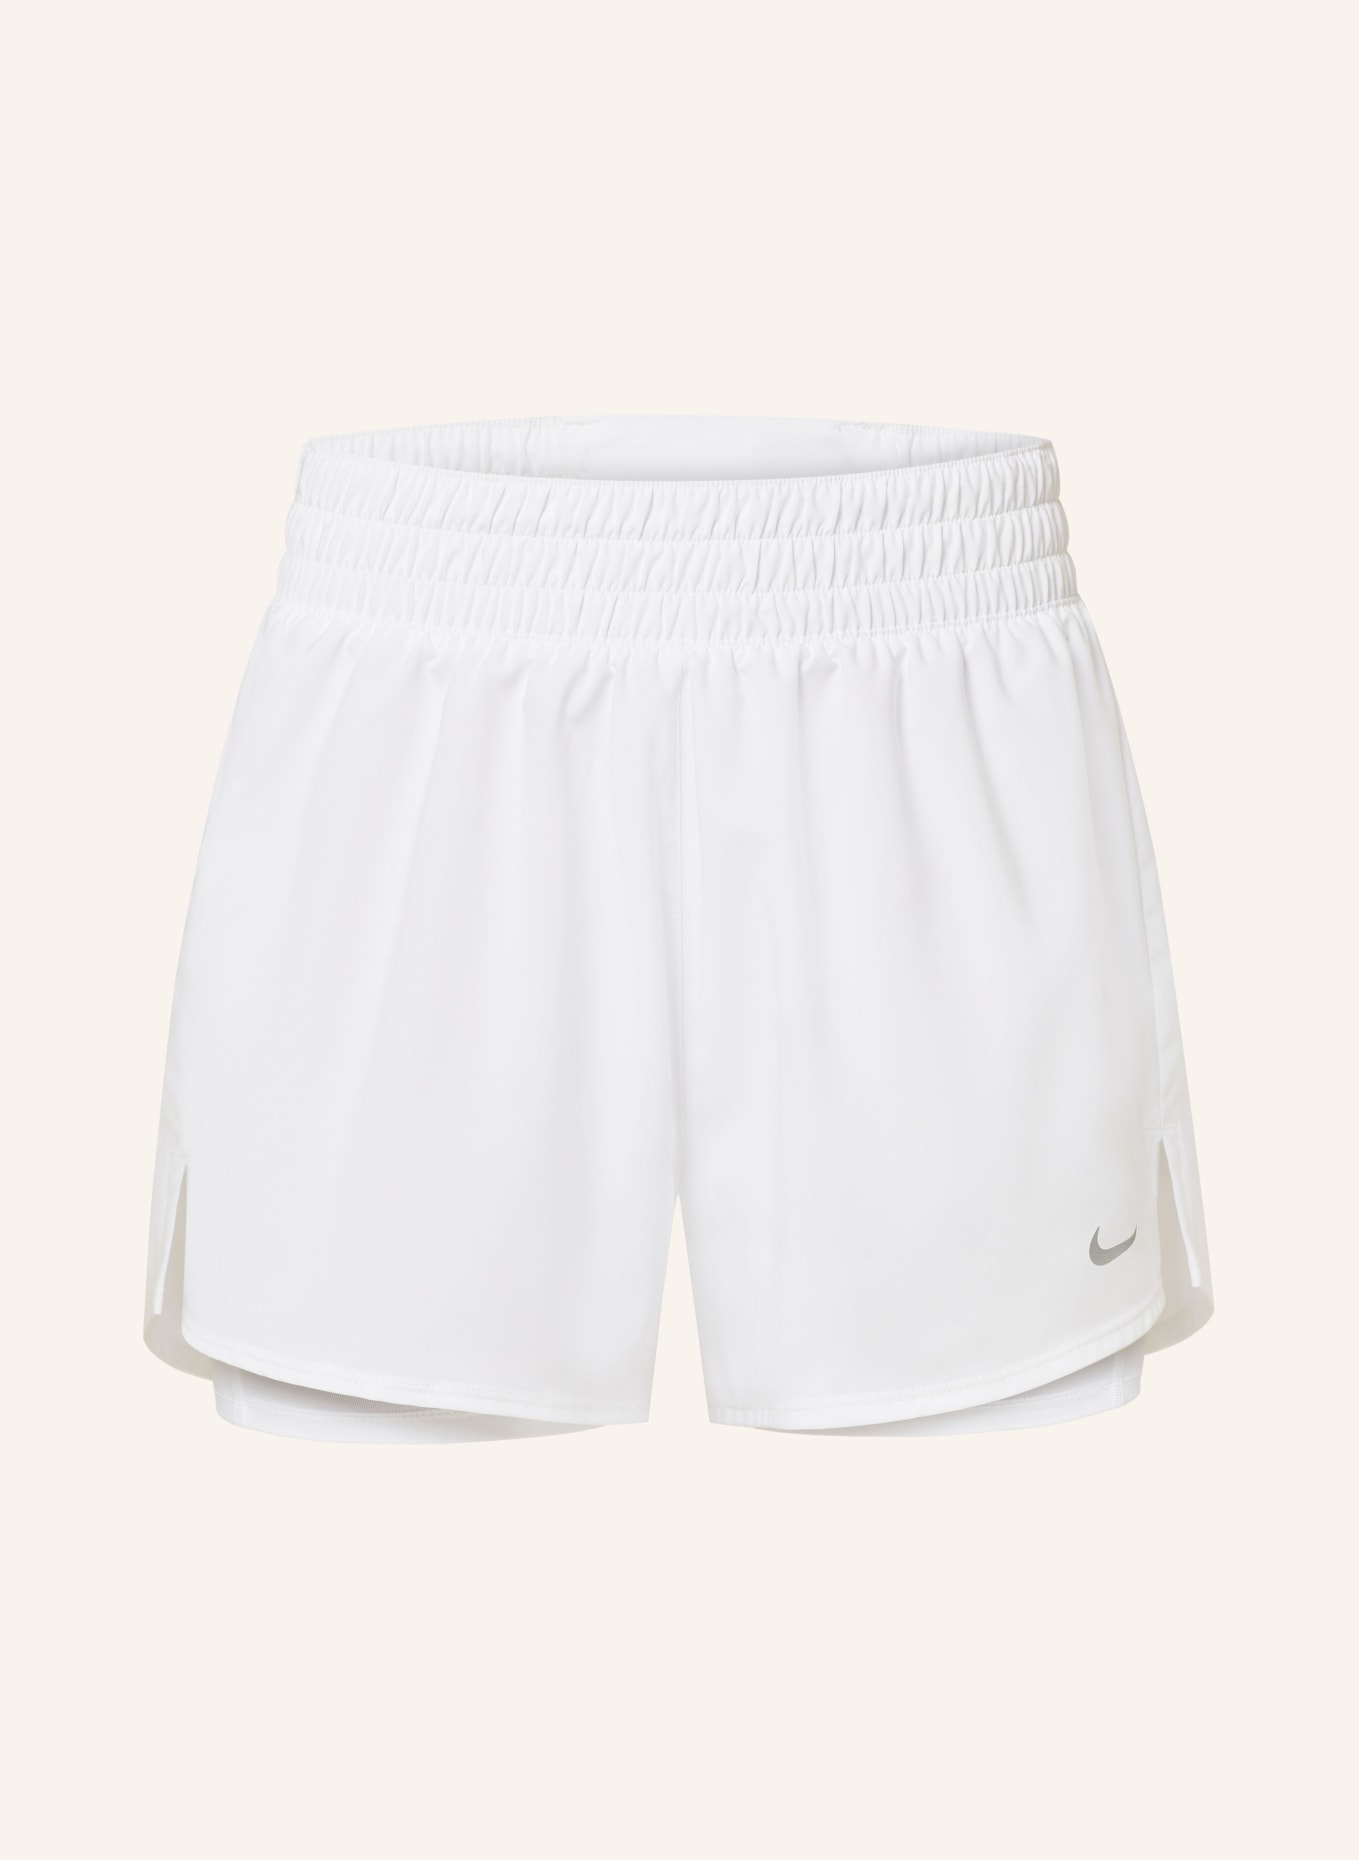 Nike 2-in-1-Trainingsshorts ONE, Farbe: WEISS (Bild 1)